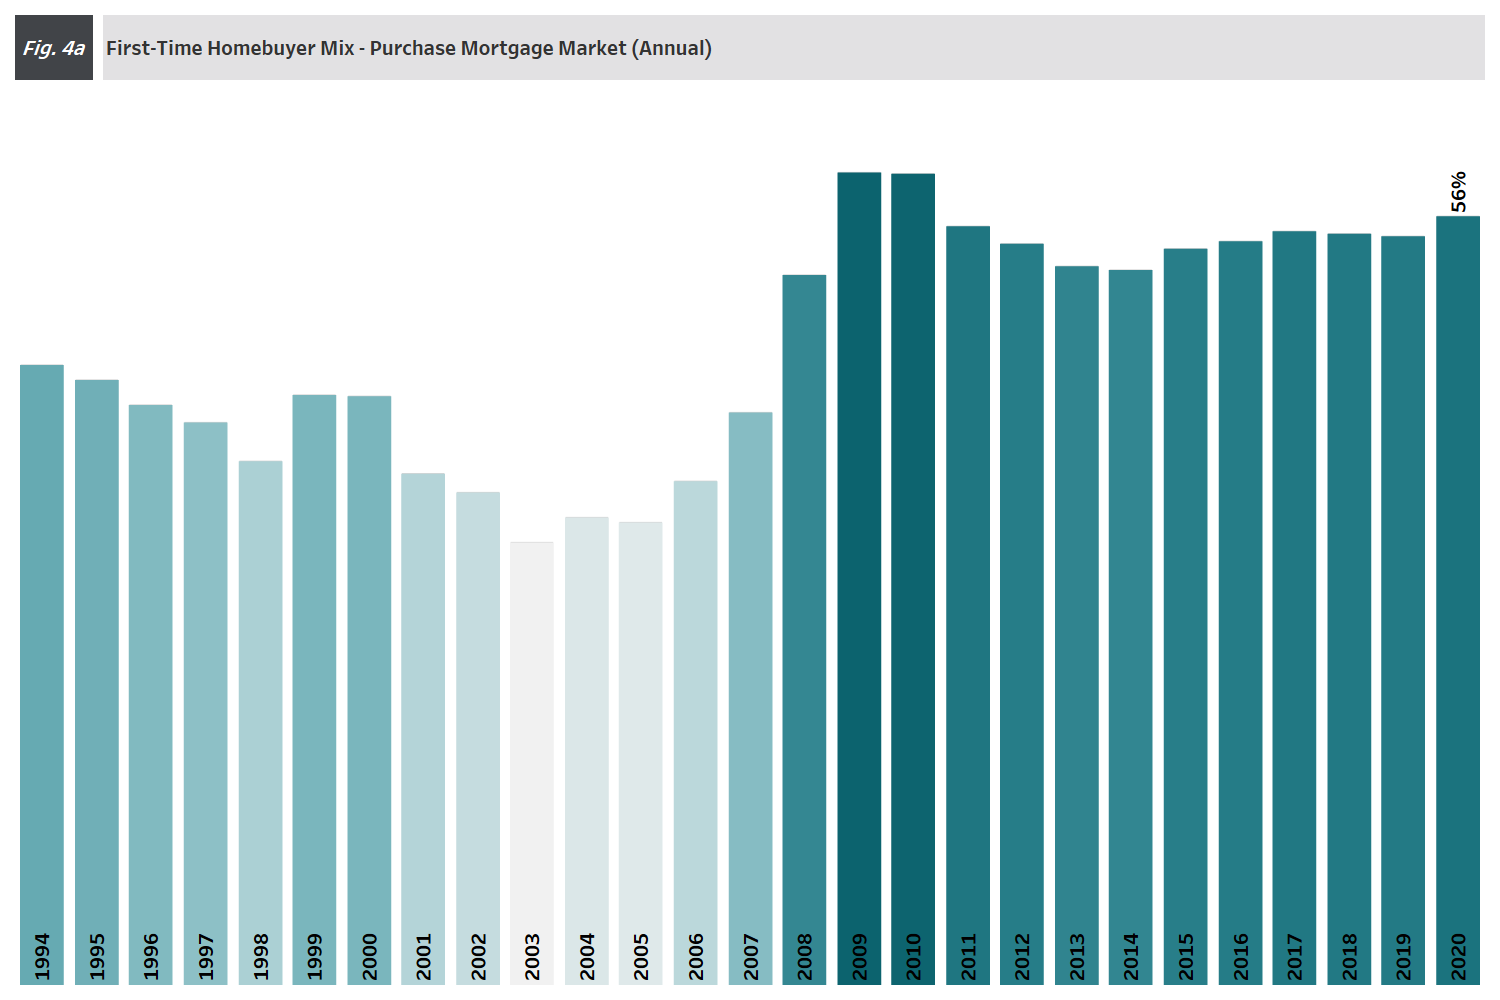 Chart: 4Q 2020 Figure 4a - Annual First-Time Homebuyer Purchase Mortgage Market Mix